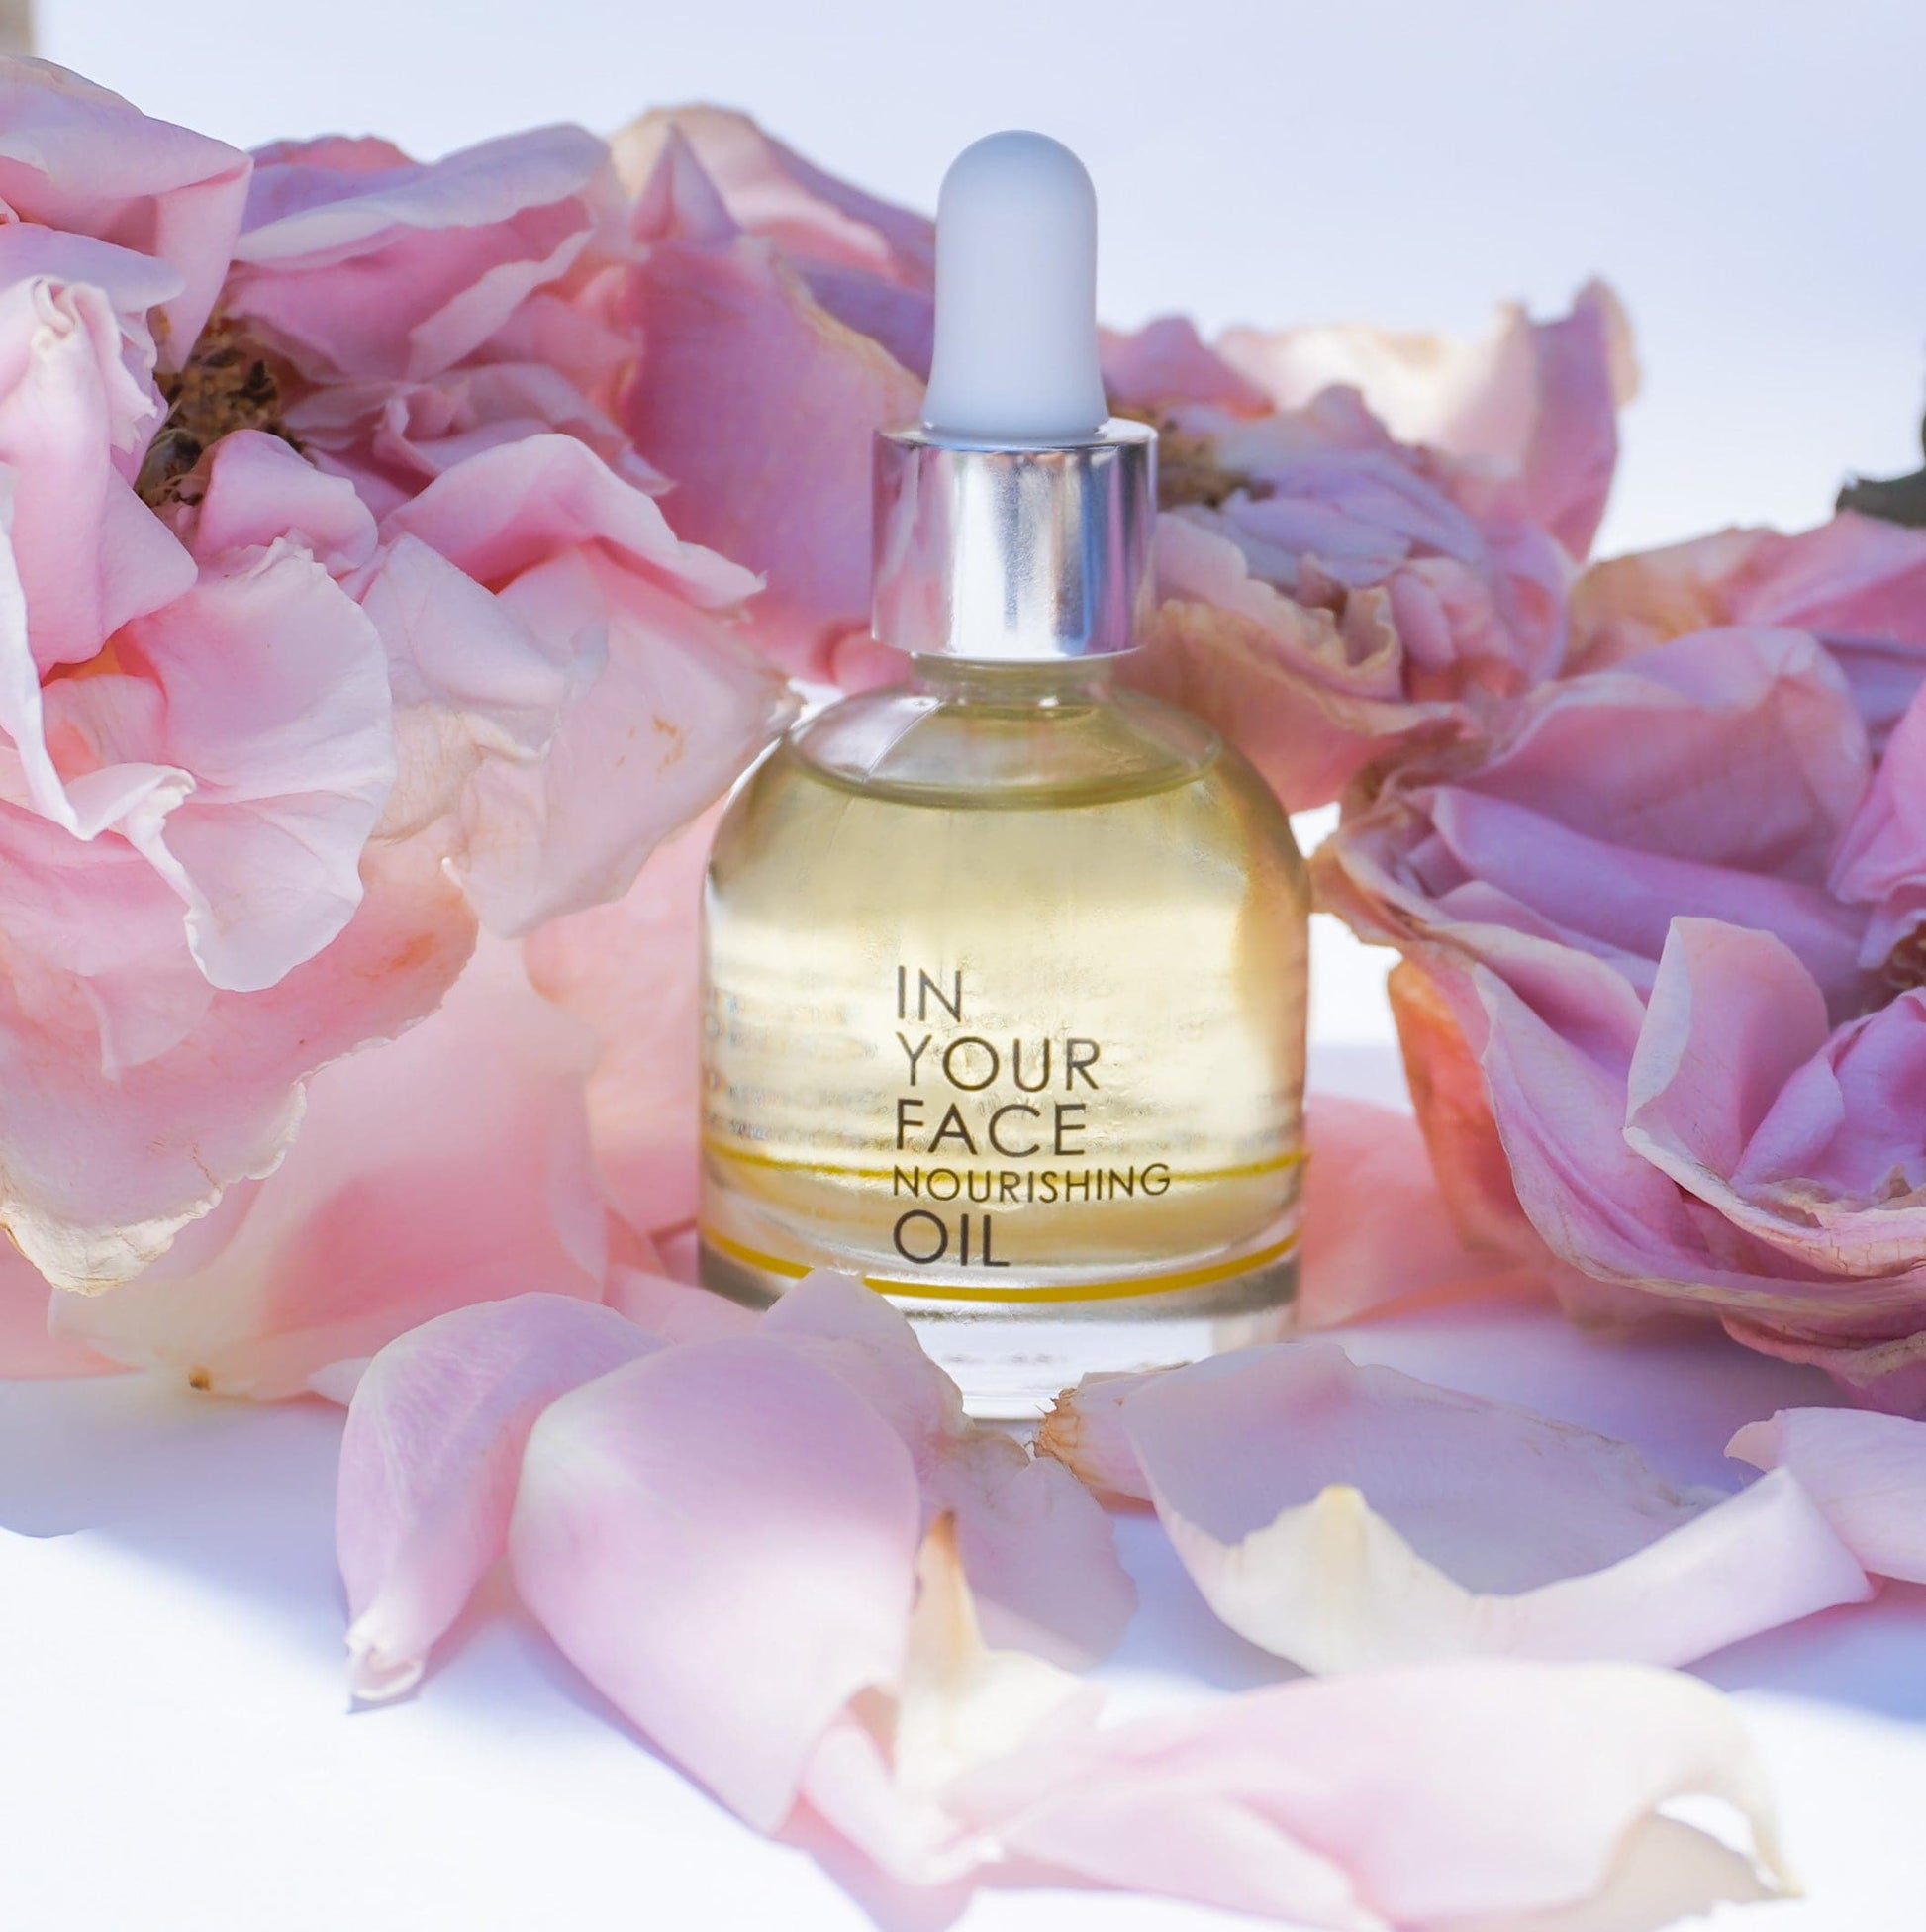 our nourishing oil among some peony petals on a white background